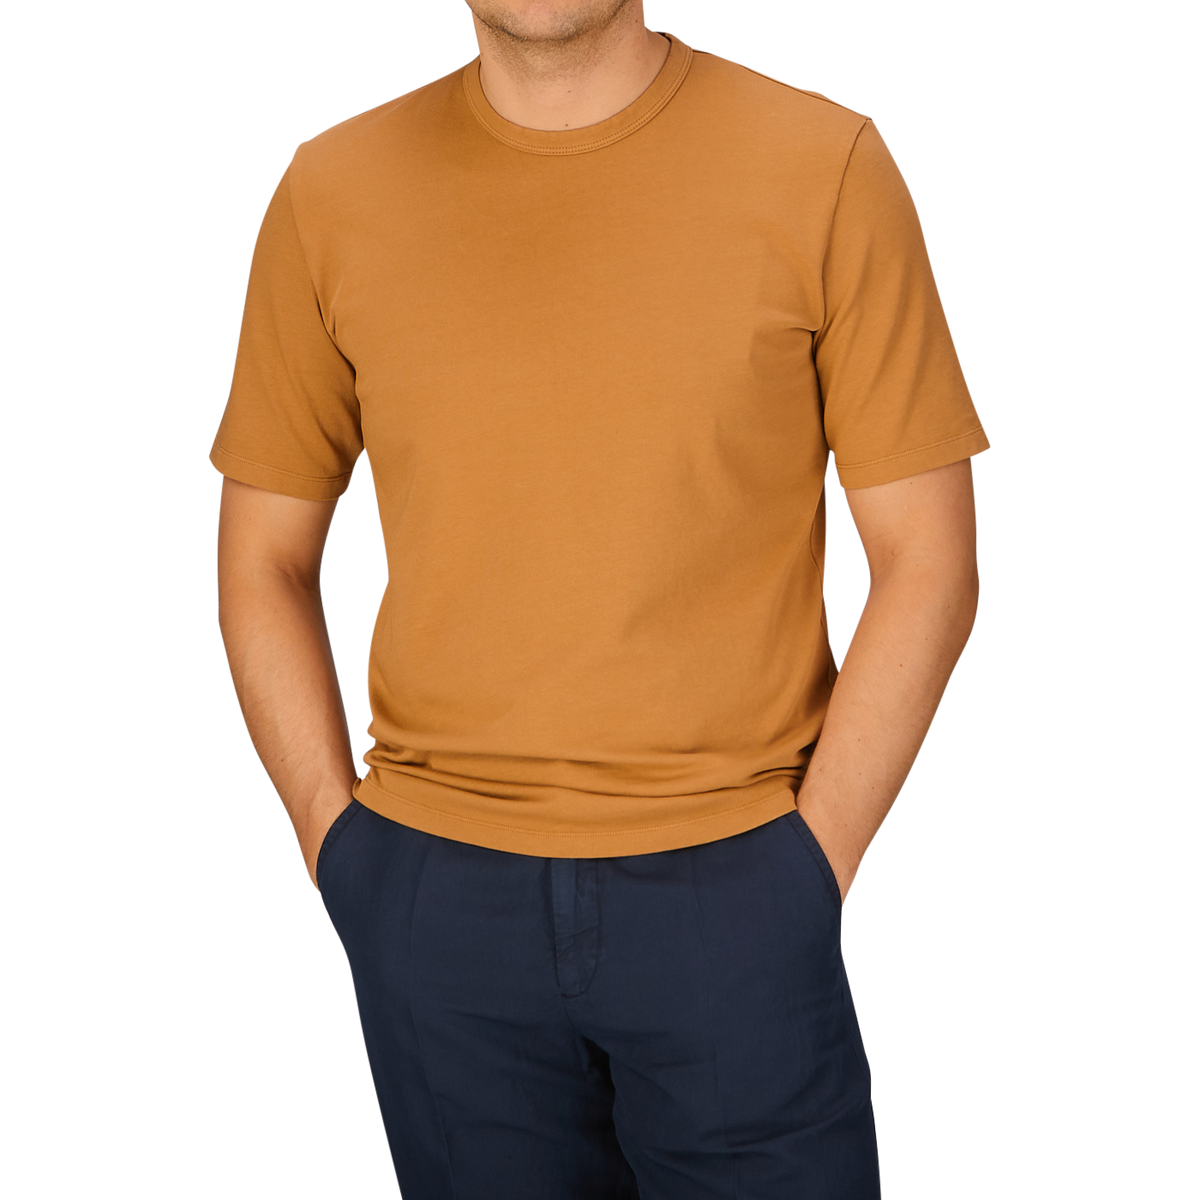 A person wearing a Brick Orange Heavy Organic Cotton T-Shirt from Tela Genova and dark pants, with their head cropped out of the frame.